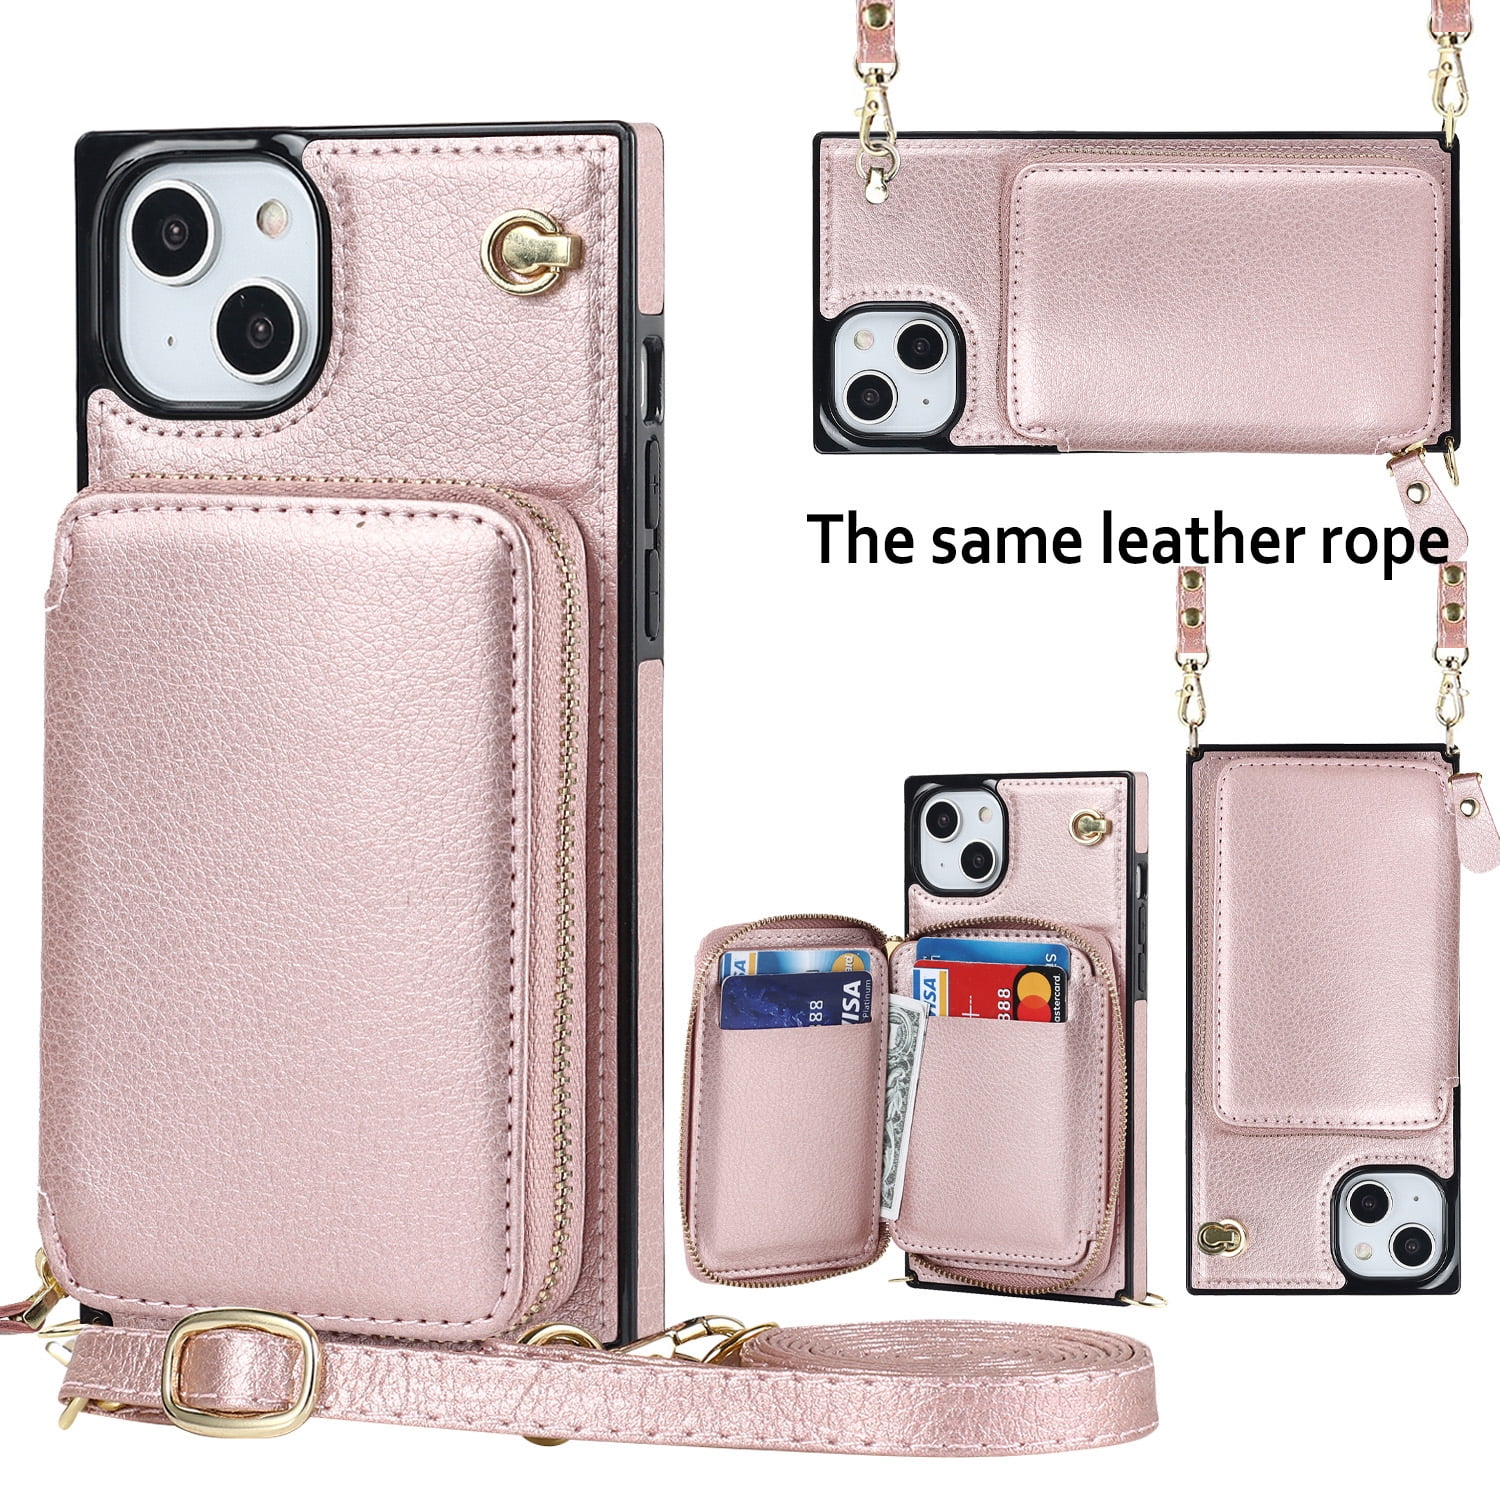 Amazon.com: Venito Universal Leather Crossbody Phone Case Crossbody iPhone  Wallet Lanyard Phone Holder (Beige) : Cell Phones & Accessories